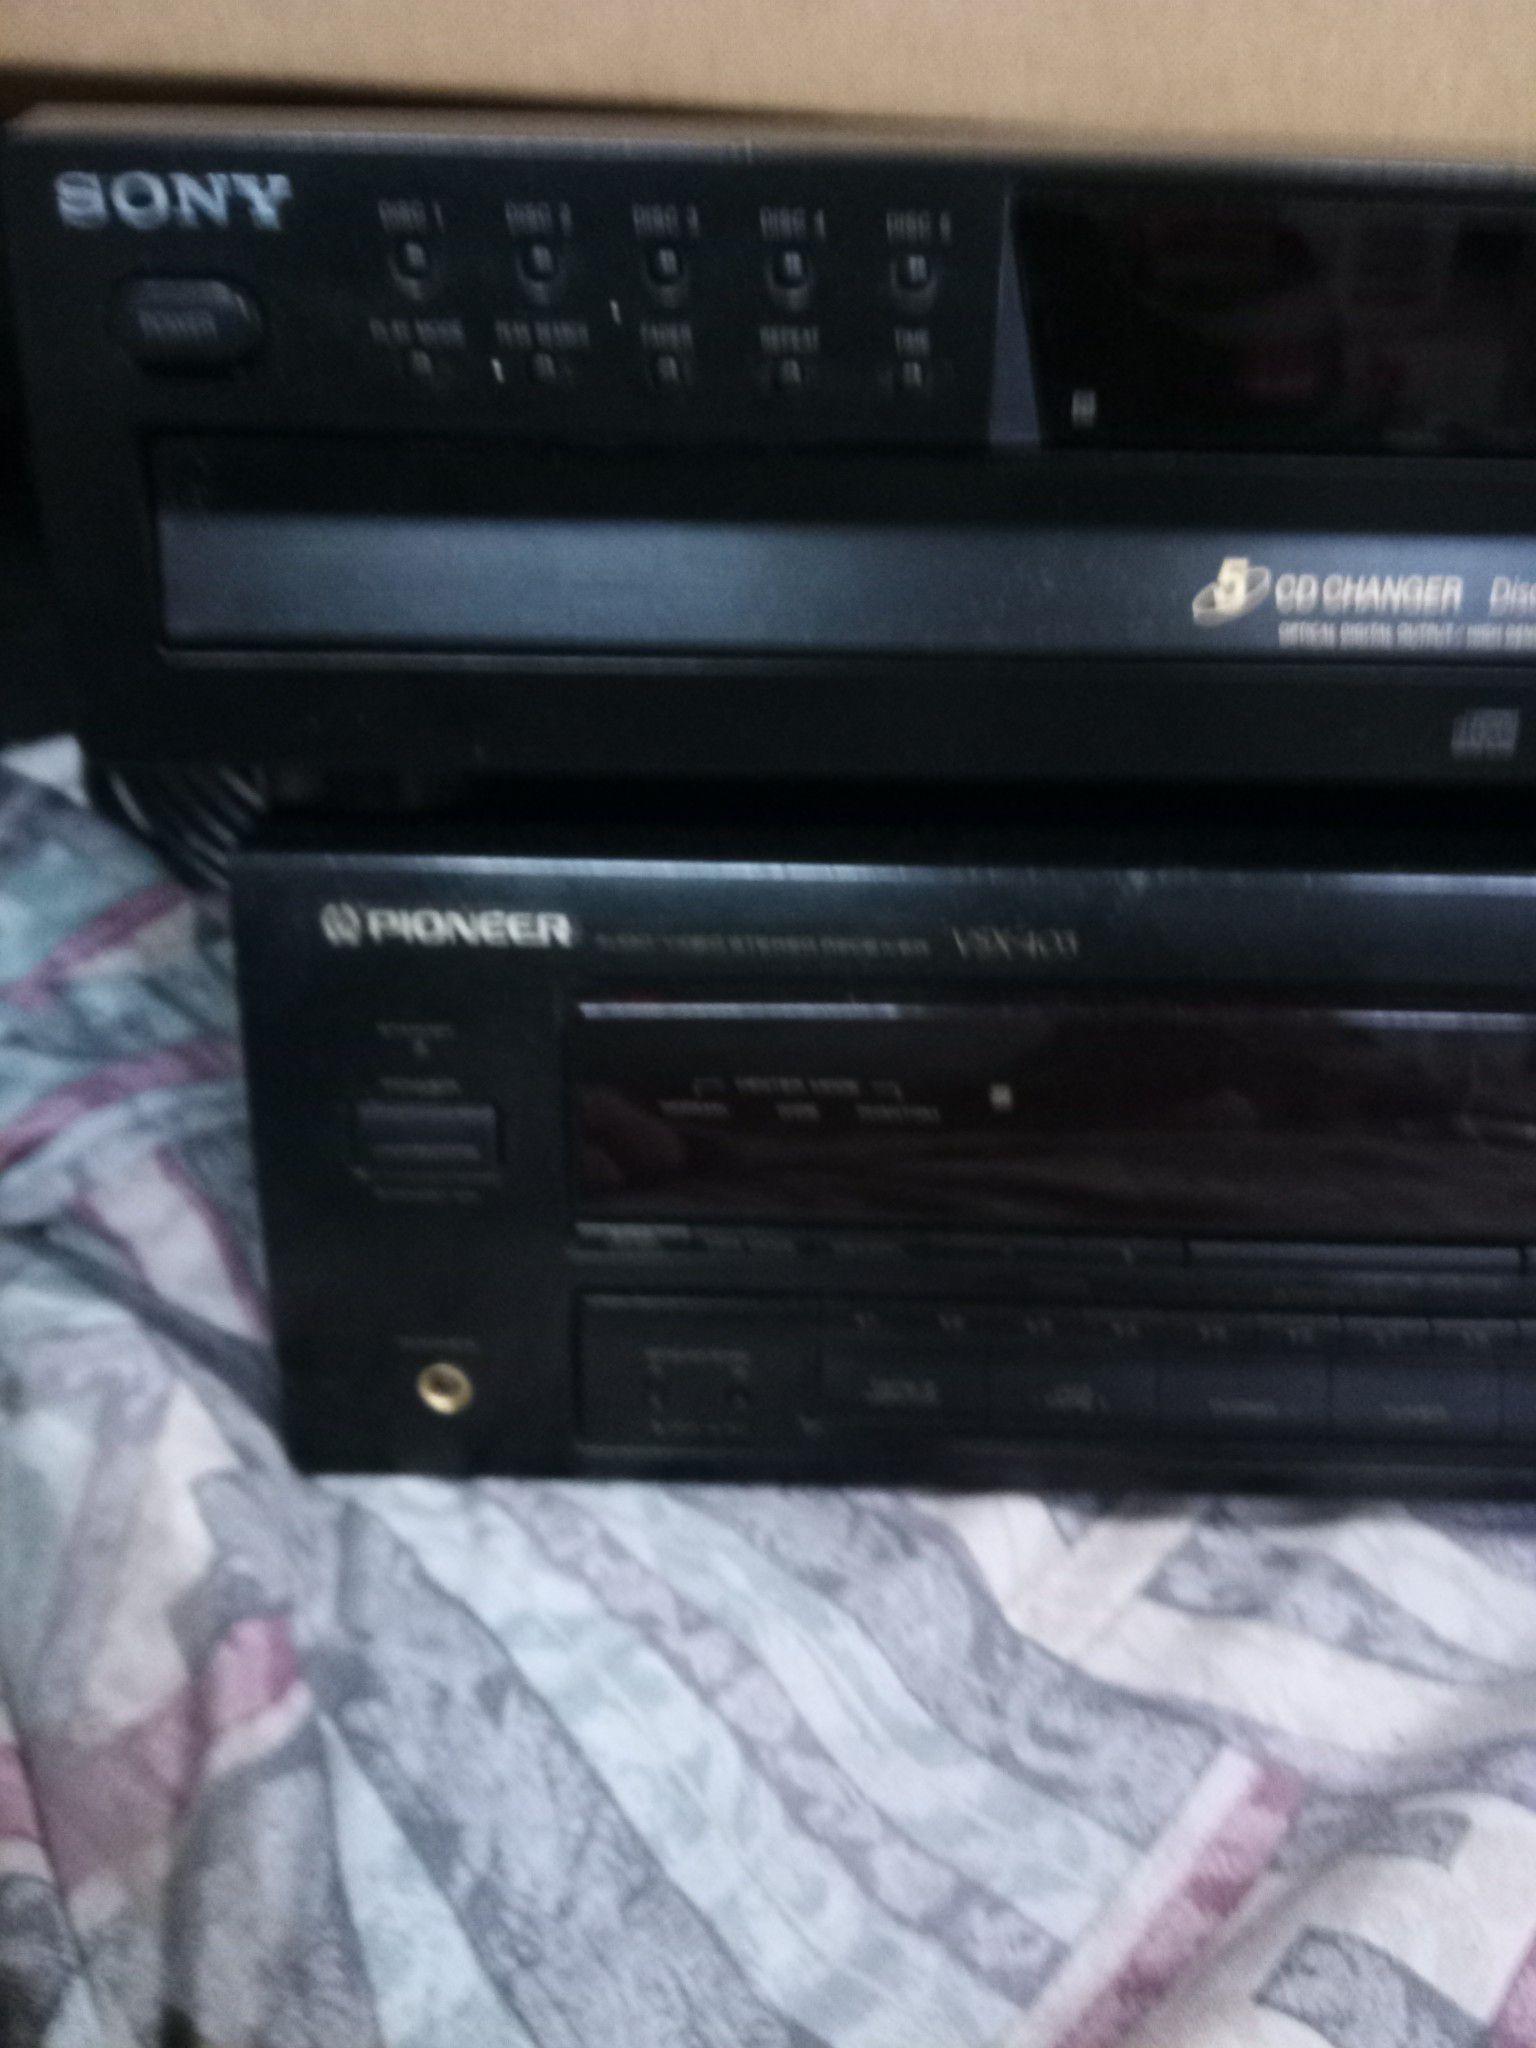 Sony disc changer pioneer receiver